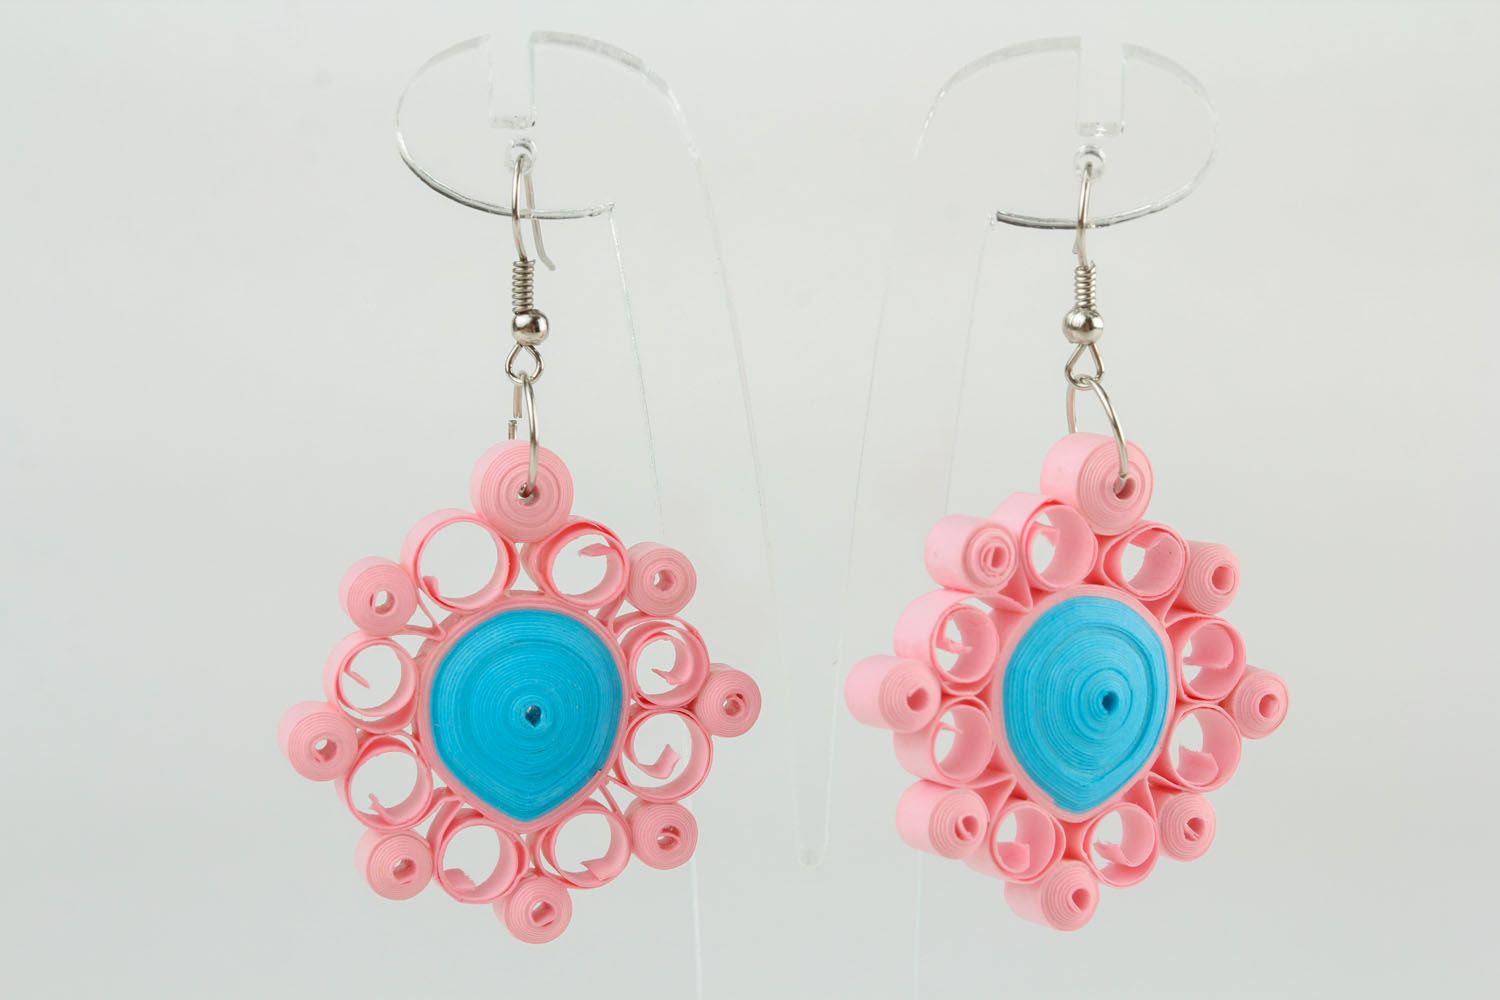 Earrings made using quilling technique photo 2